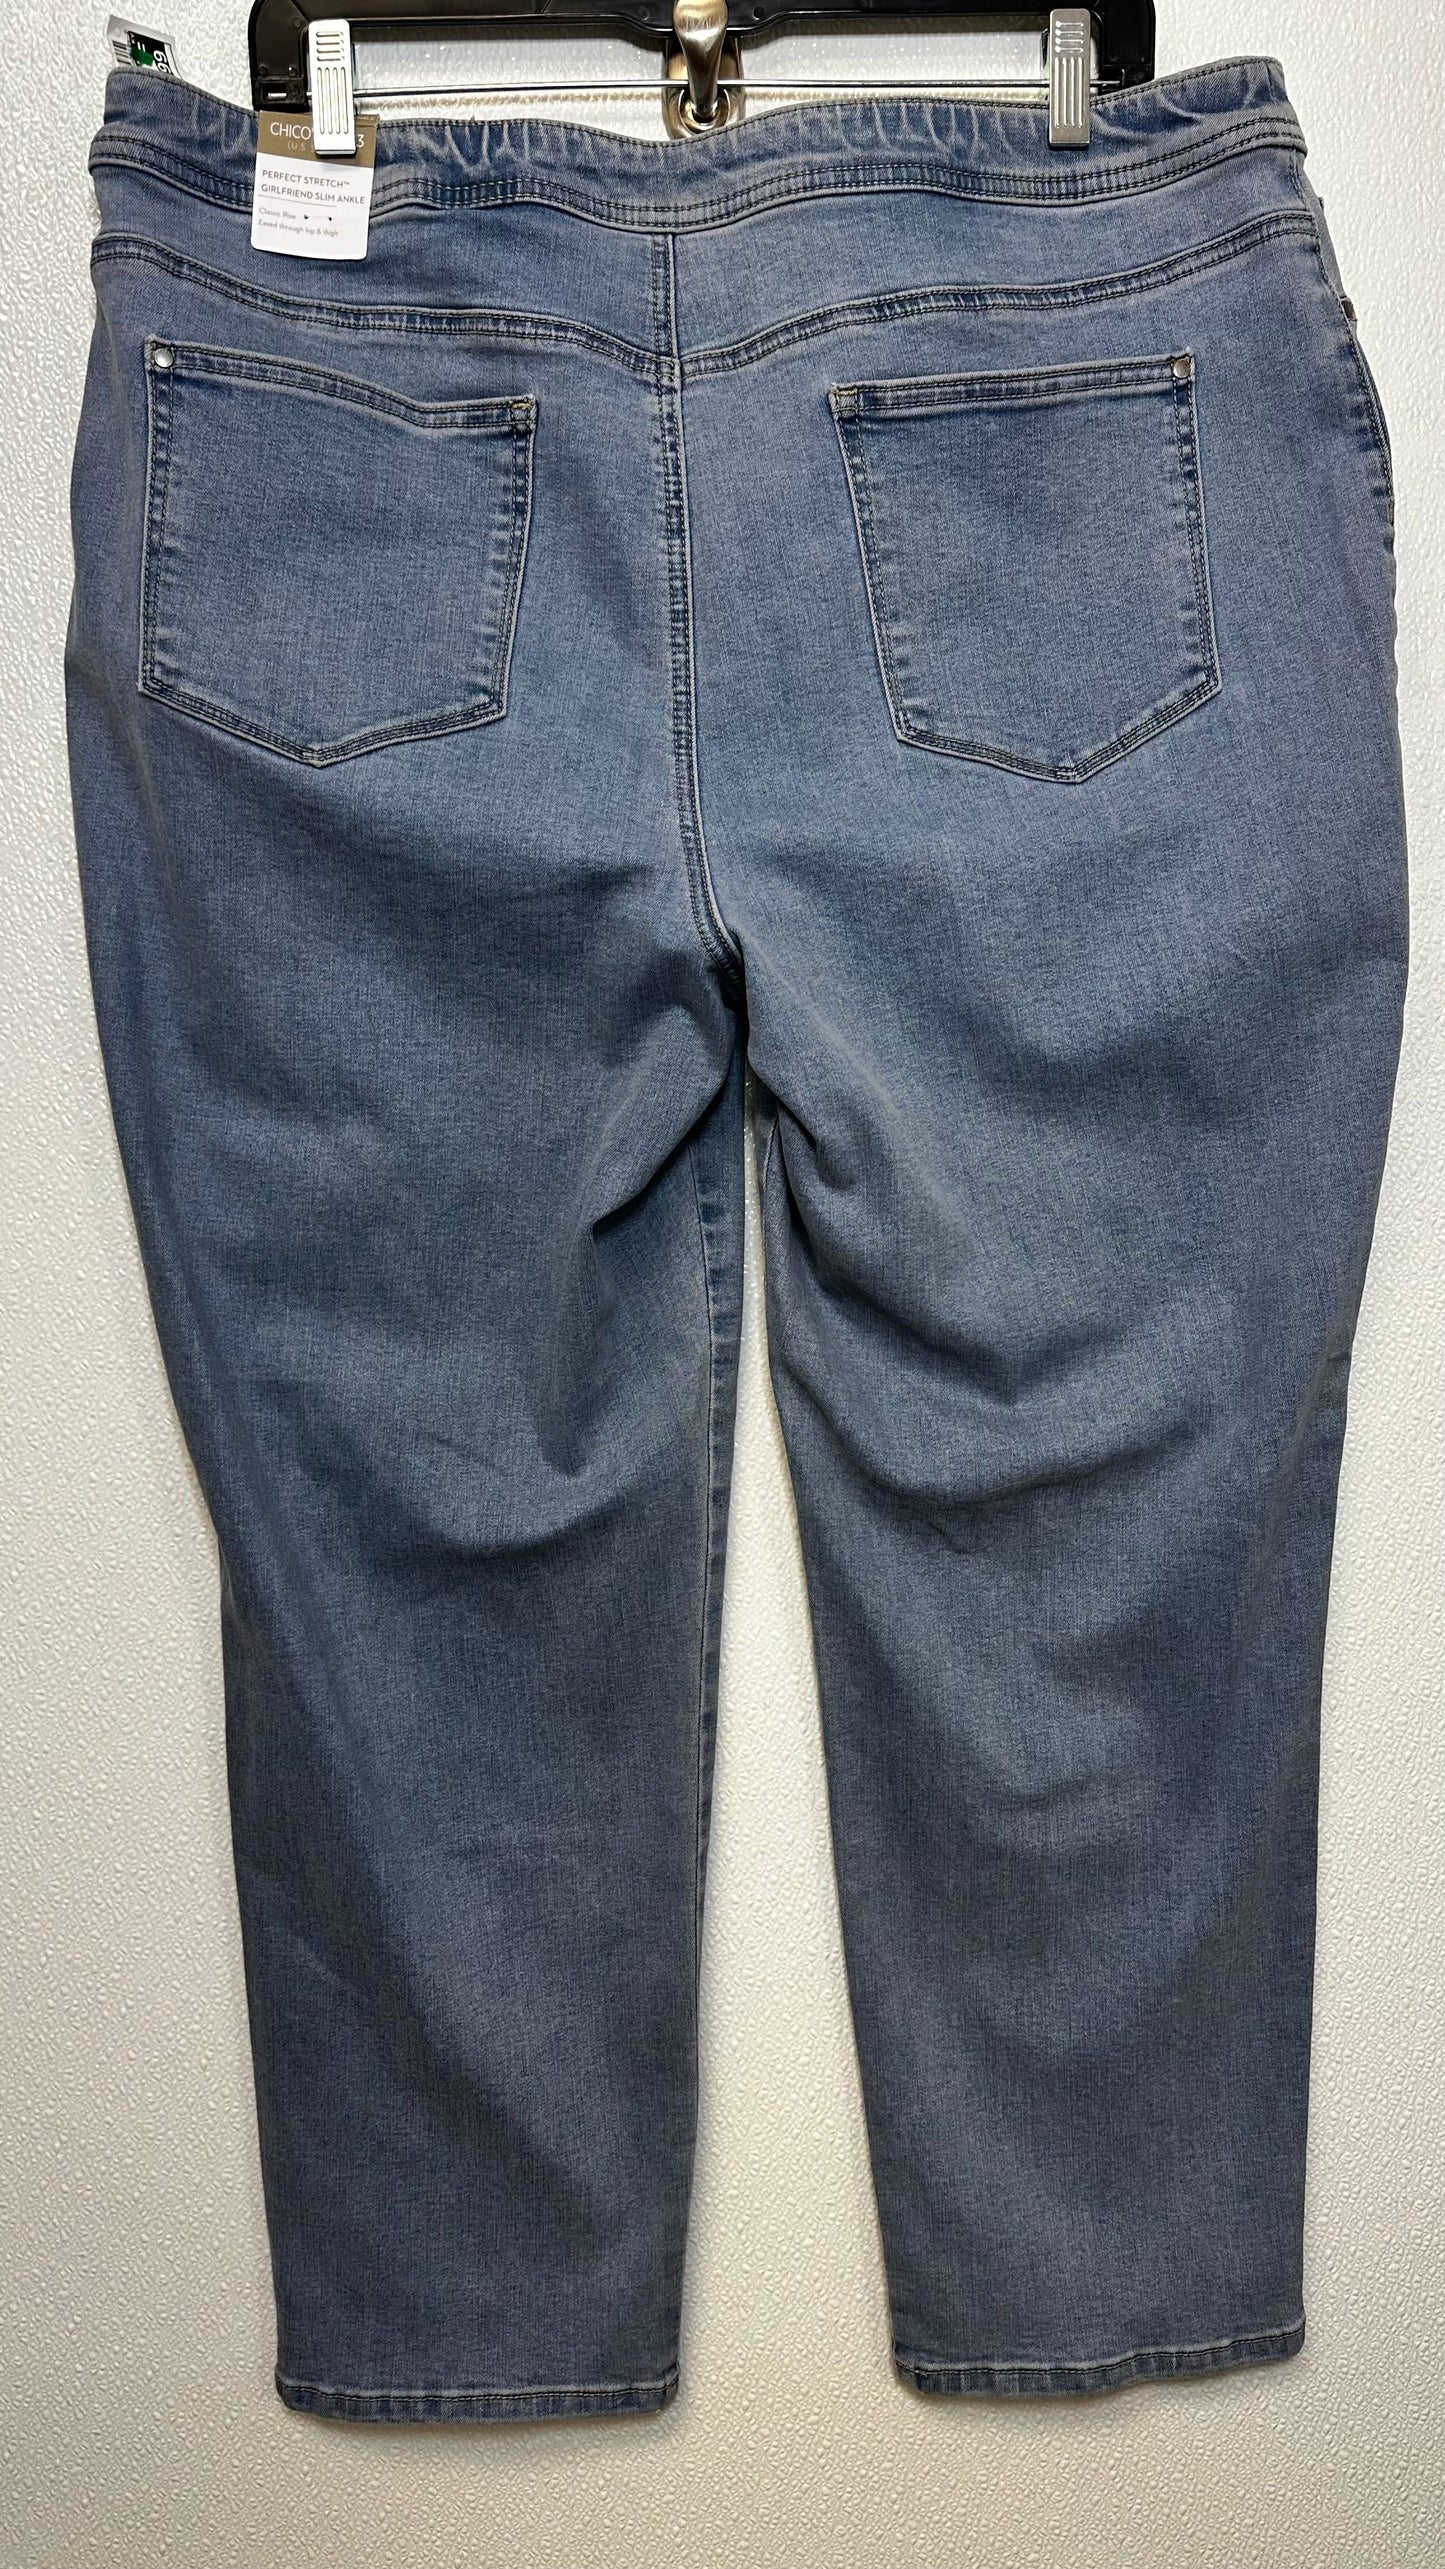 Denim Jeans Cropped Chicos O, Size 16